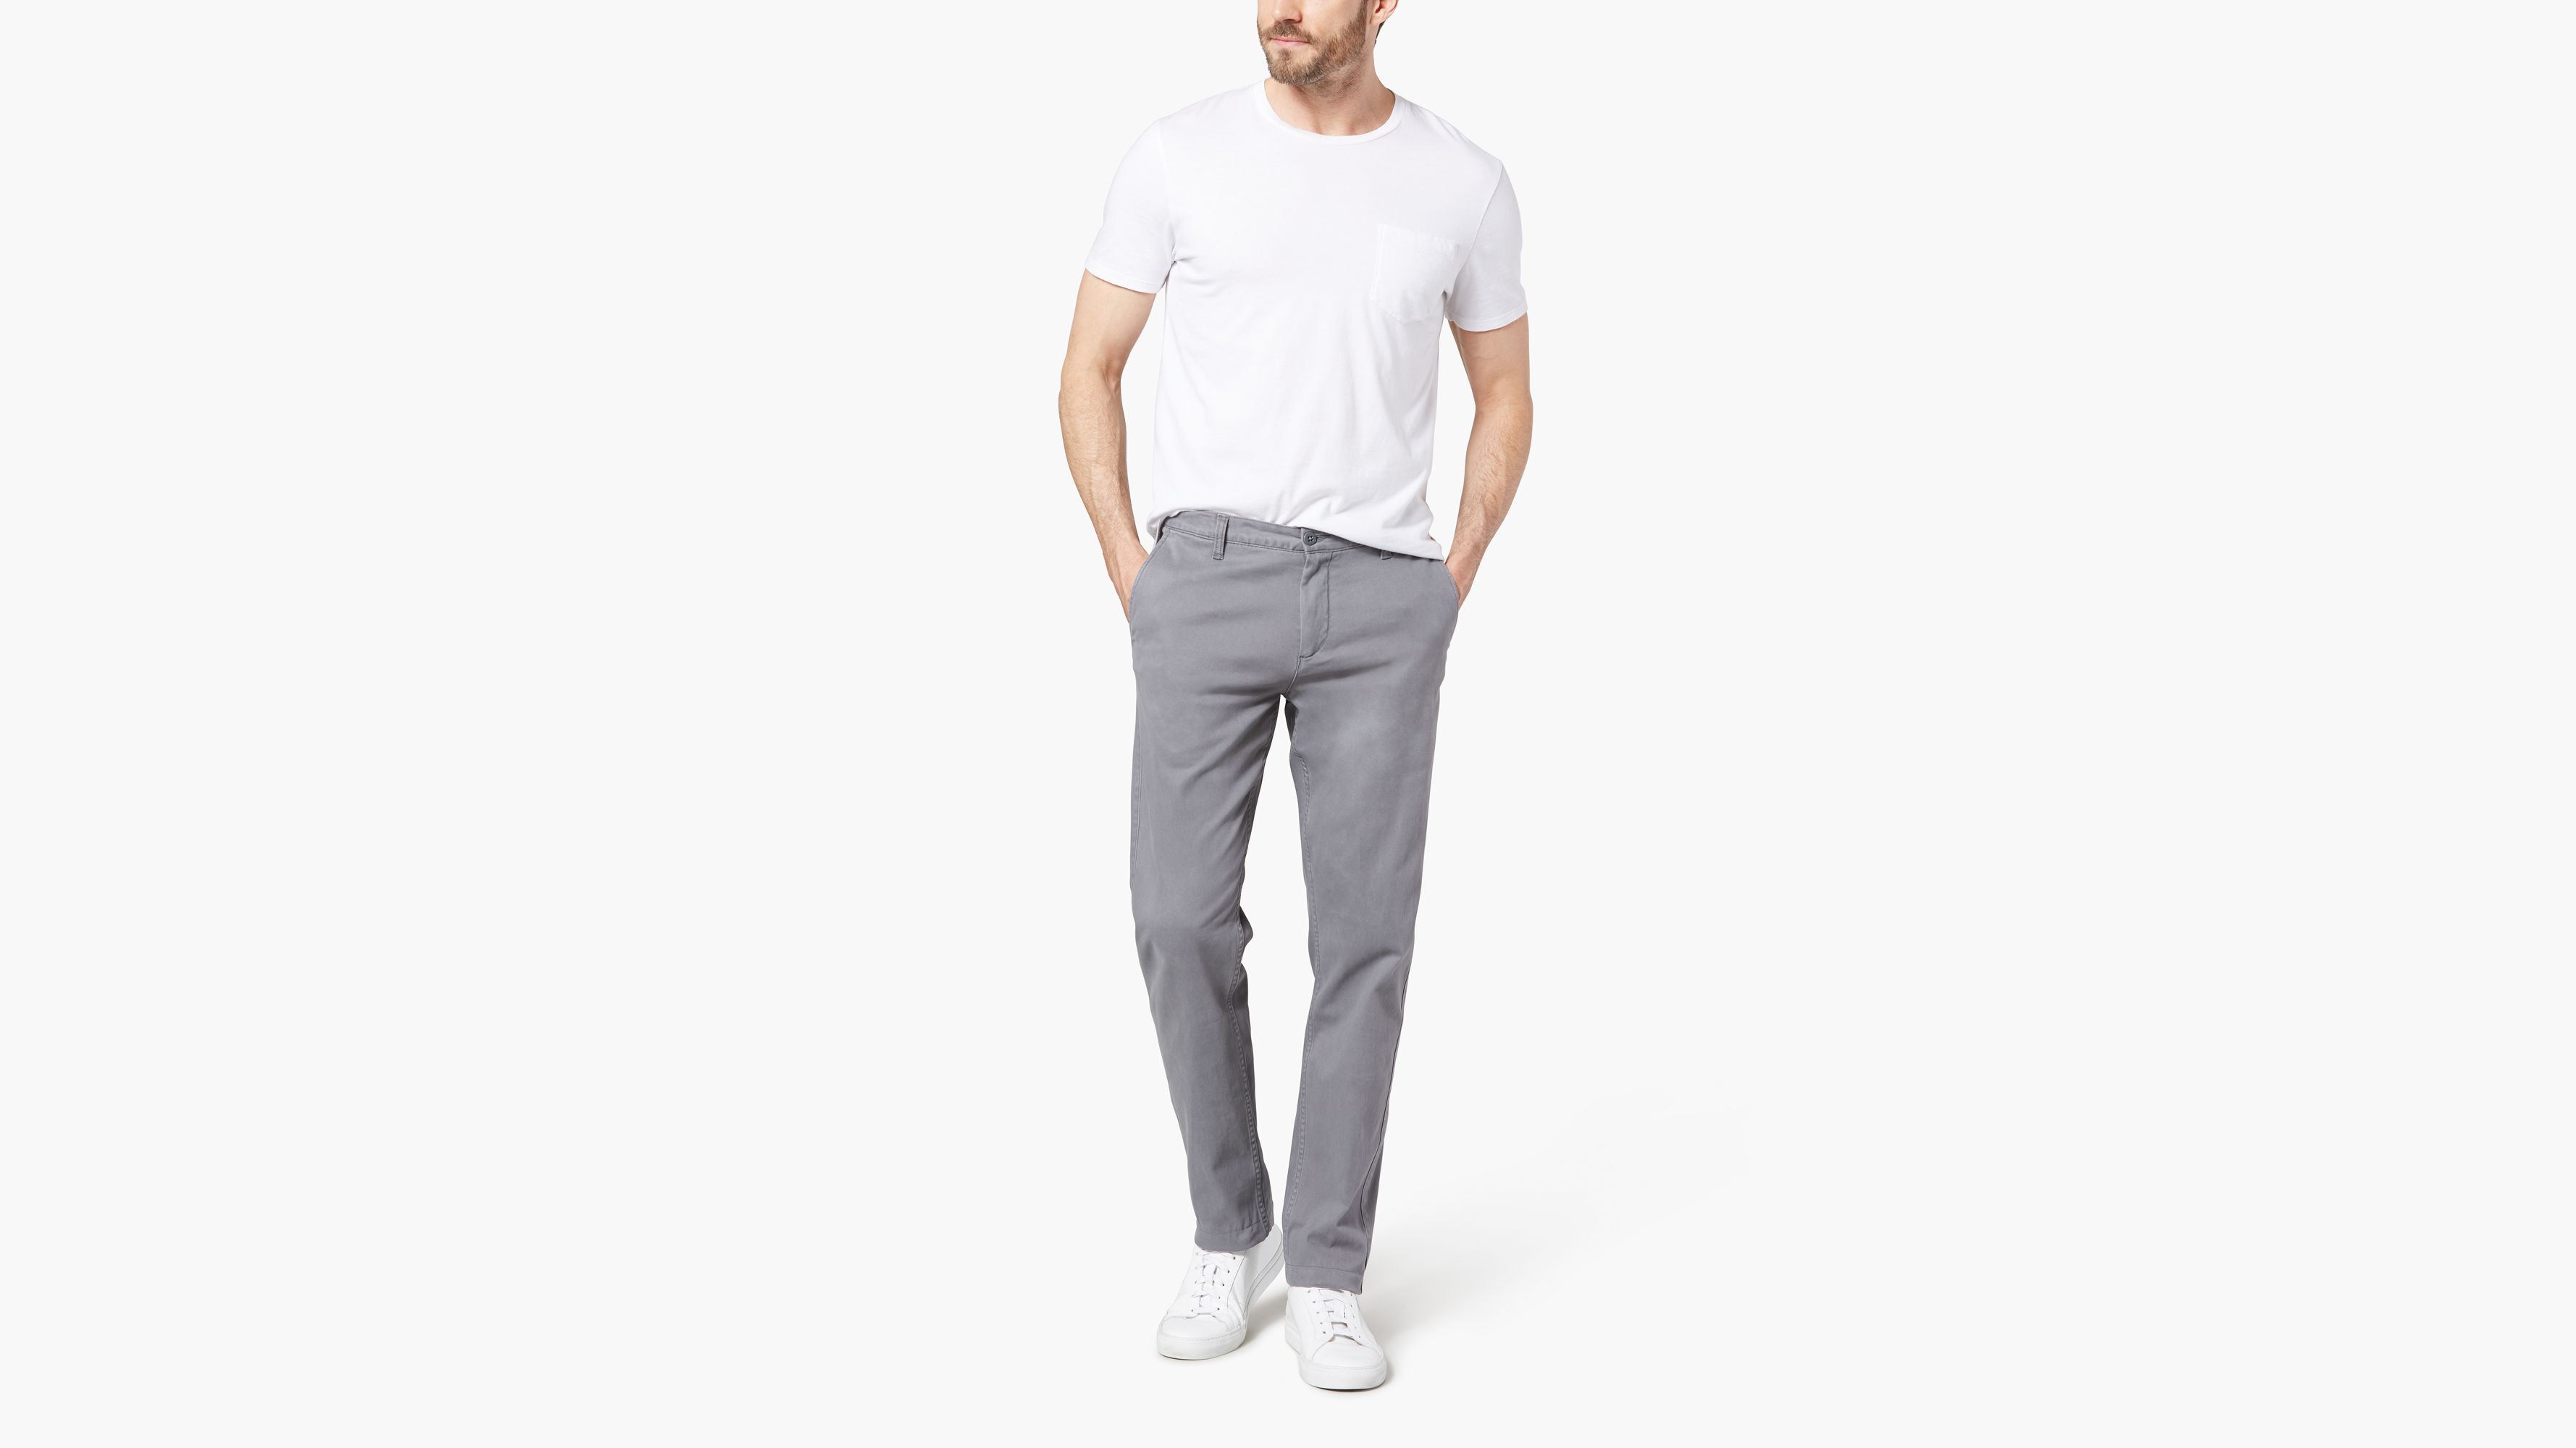 washed khaki pants slim tapered fit